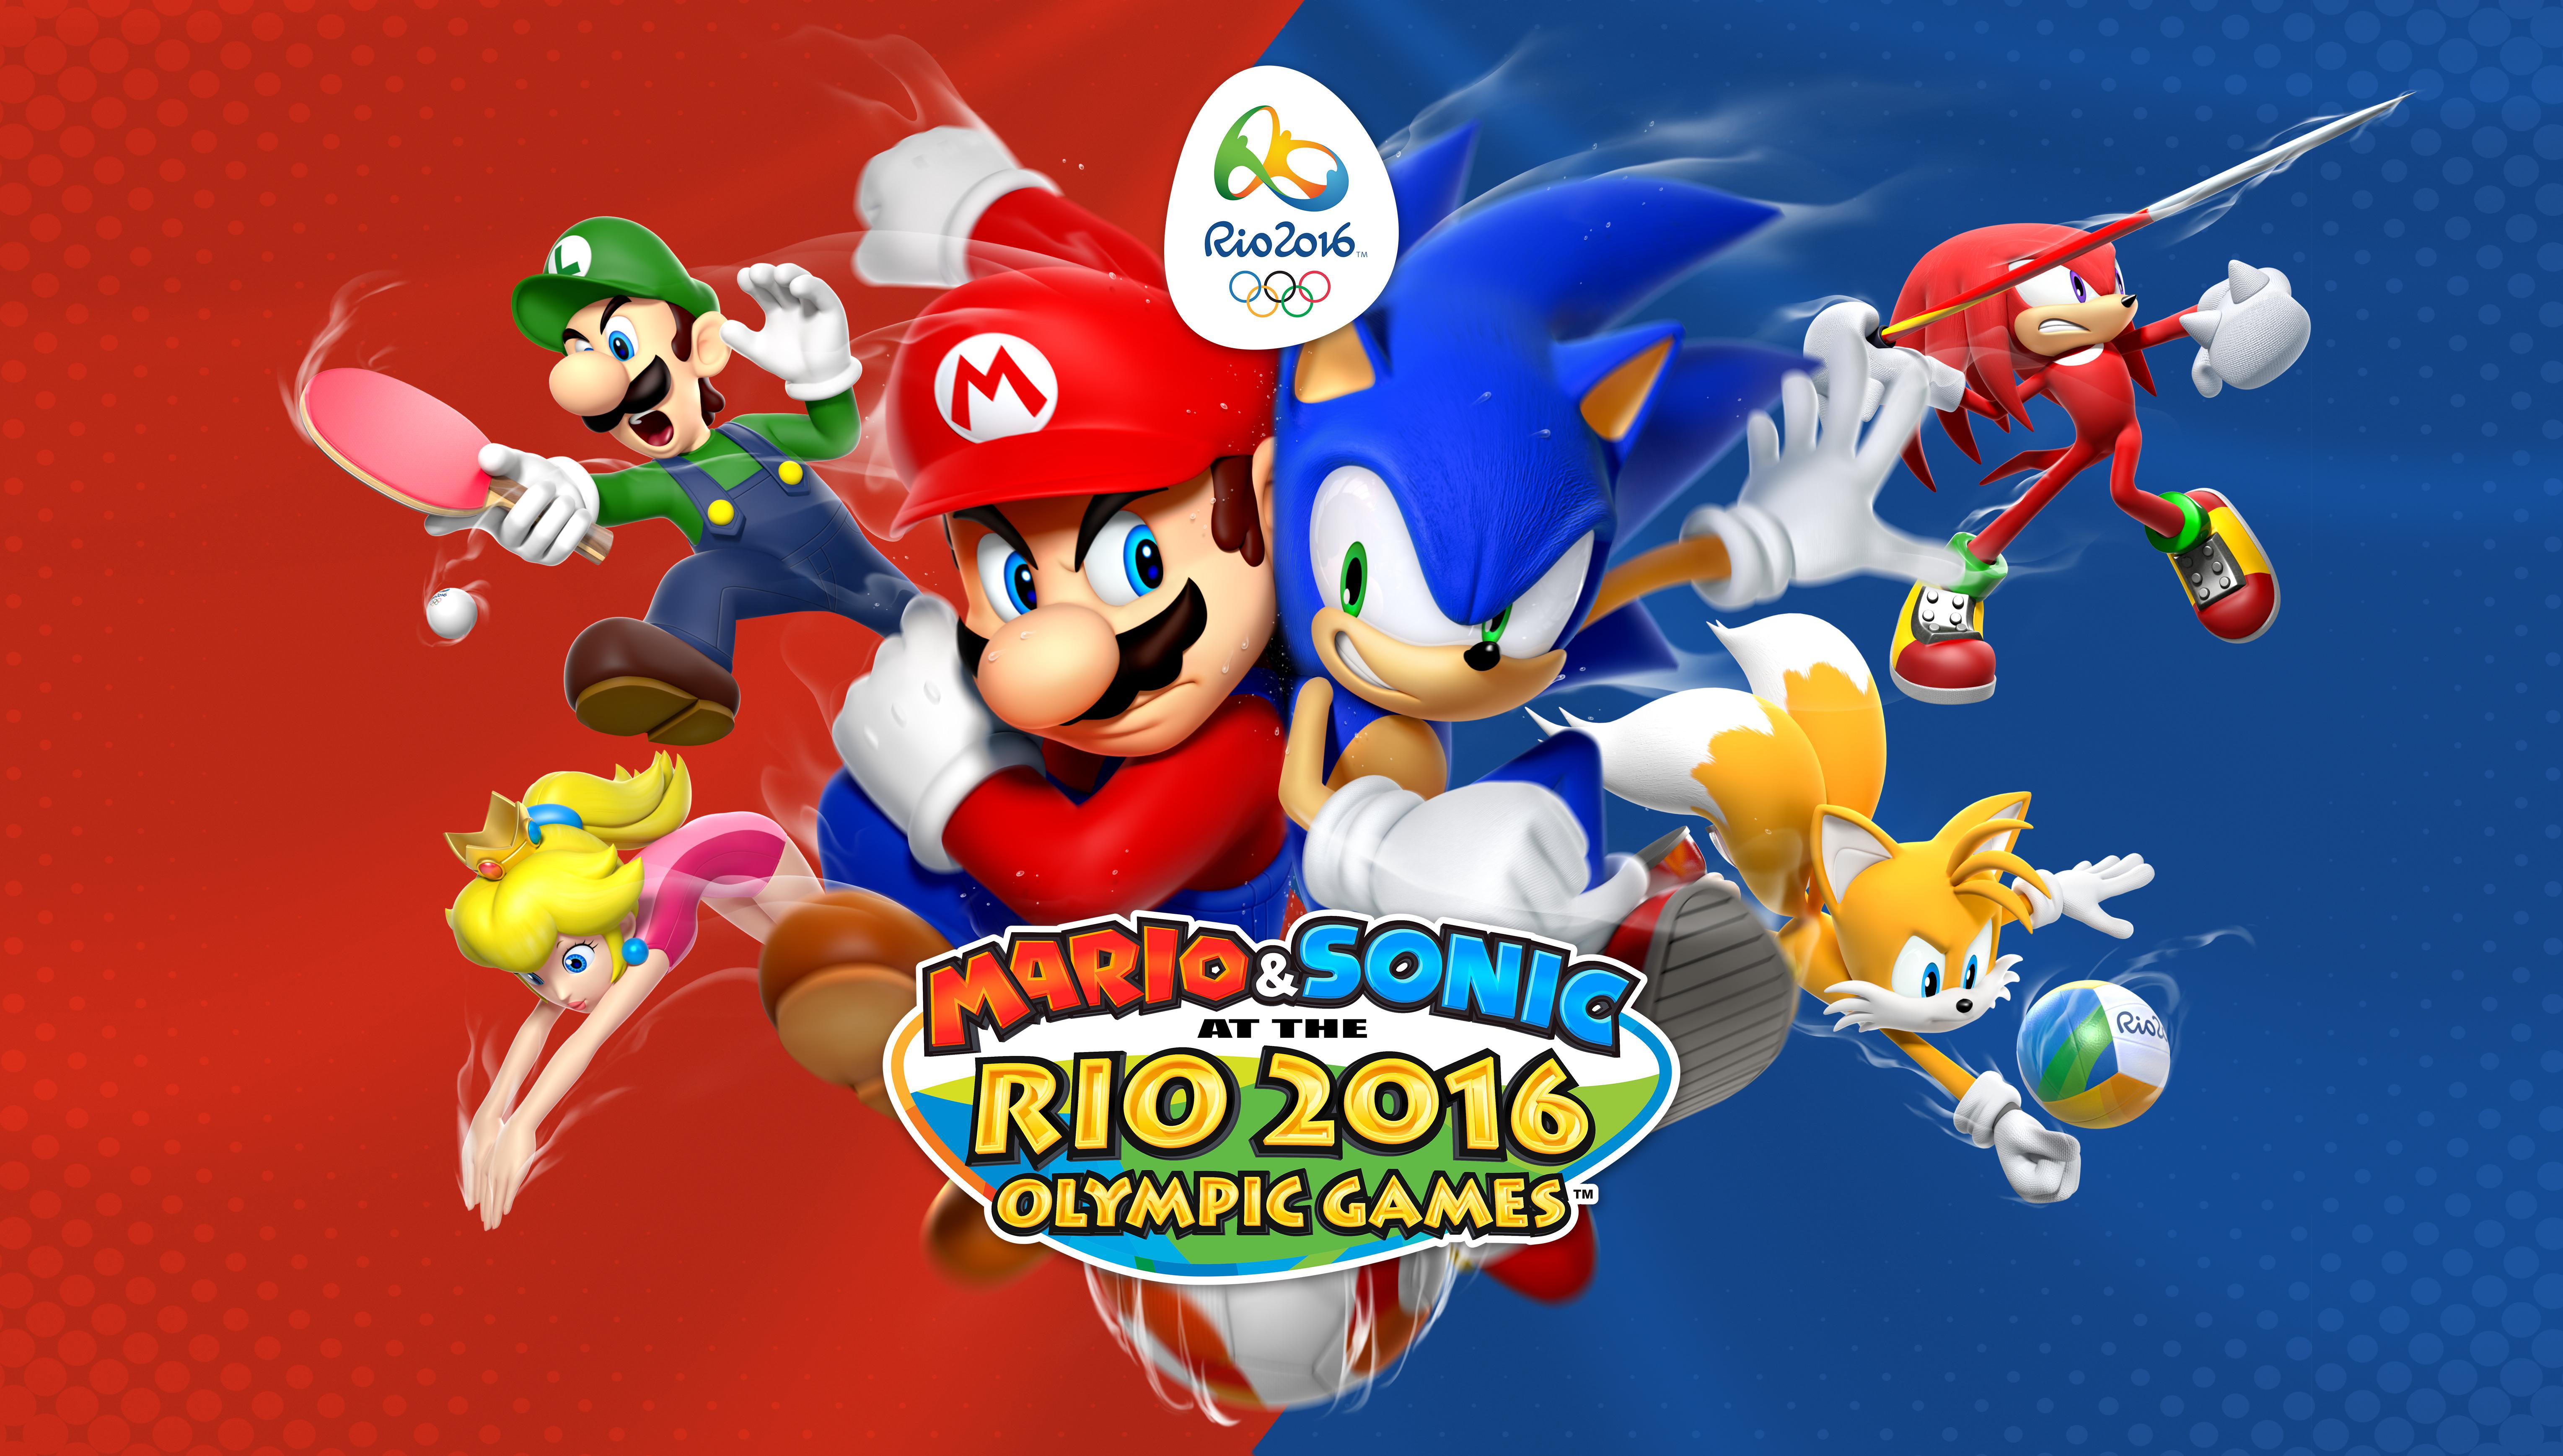 Mario & Sonic at the Olympic Games HD Wallpaper